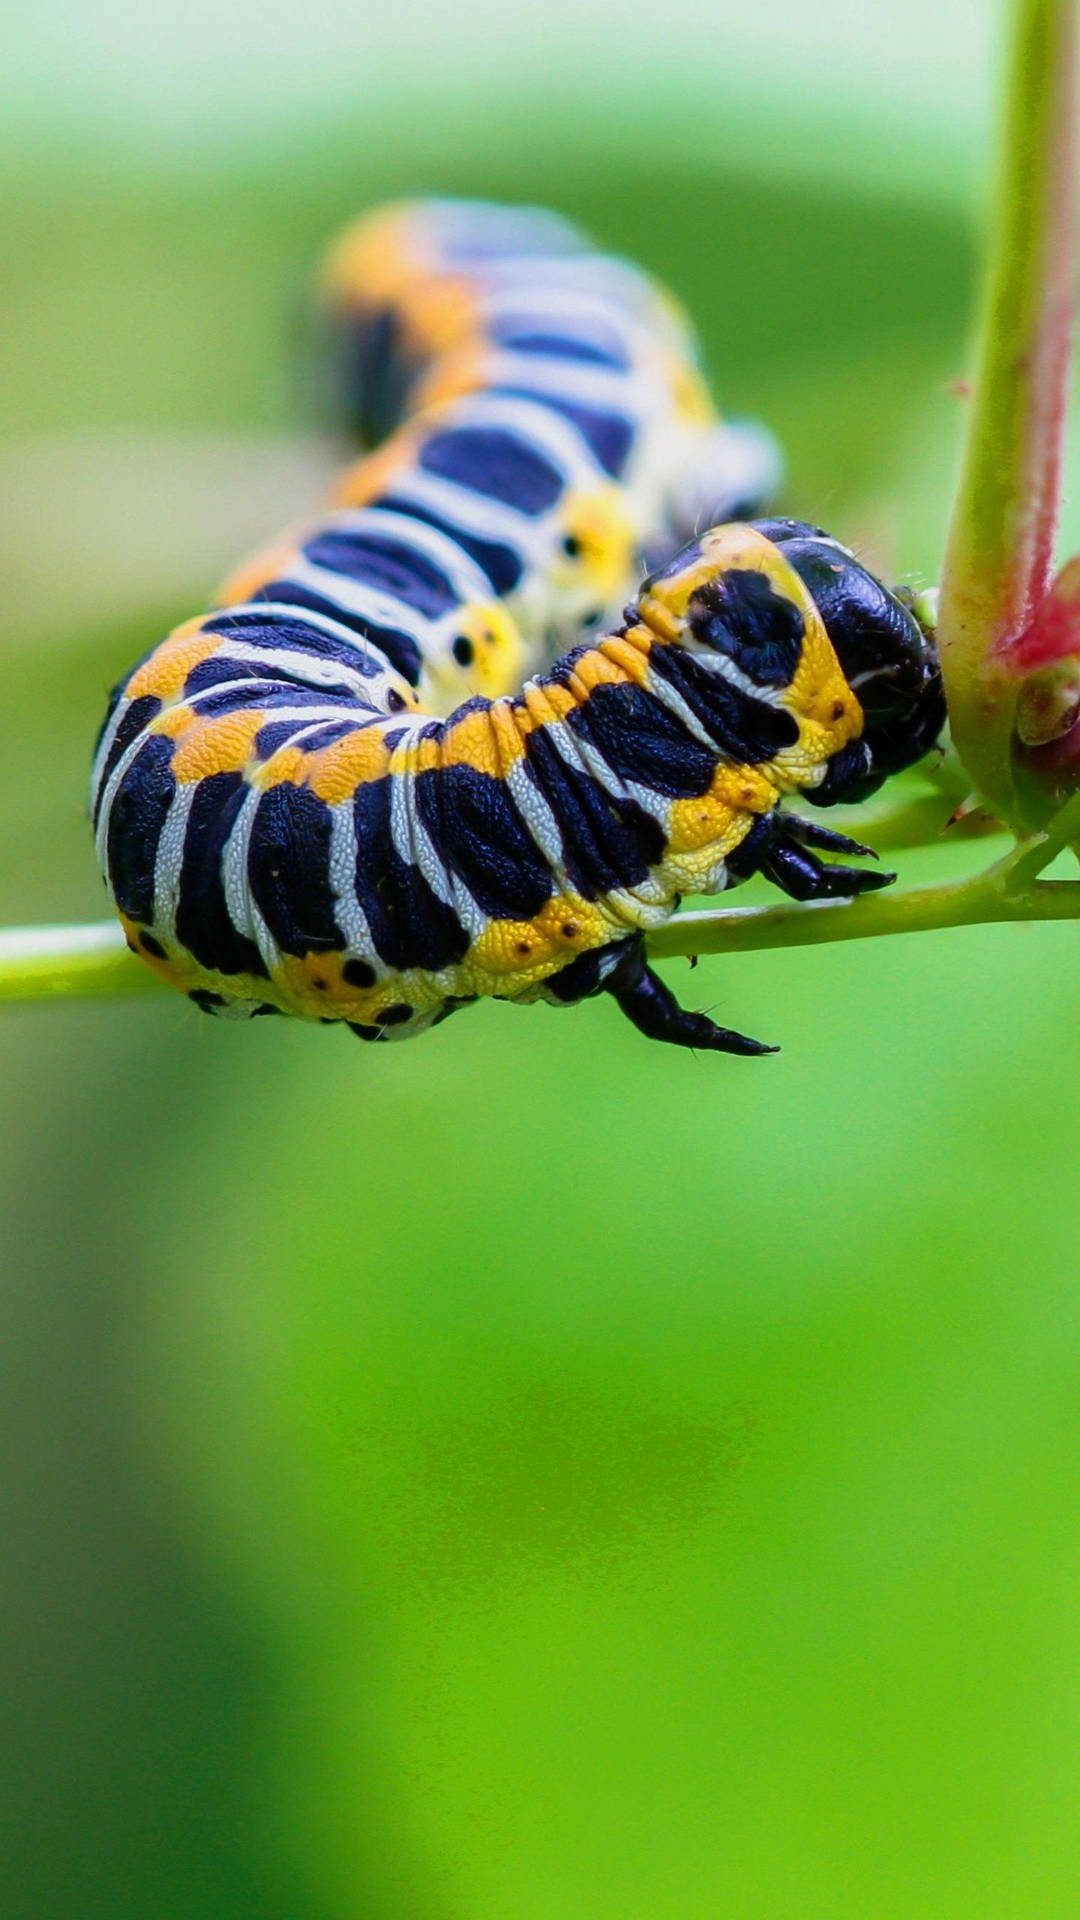 Close-up Of A Vibrant, Detailed Caterpillar With Black Legs